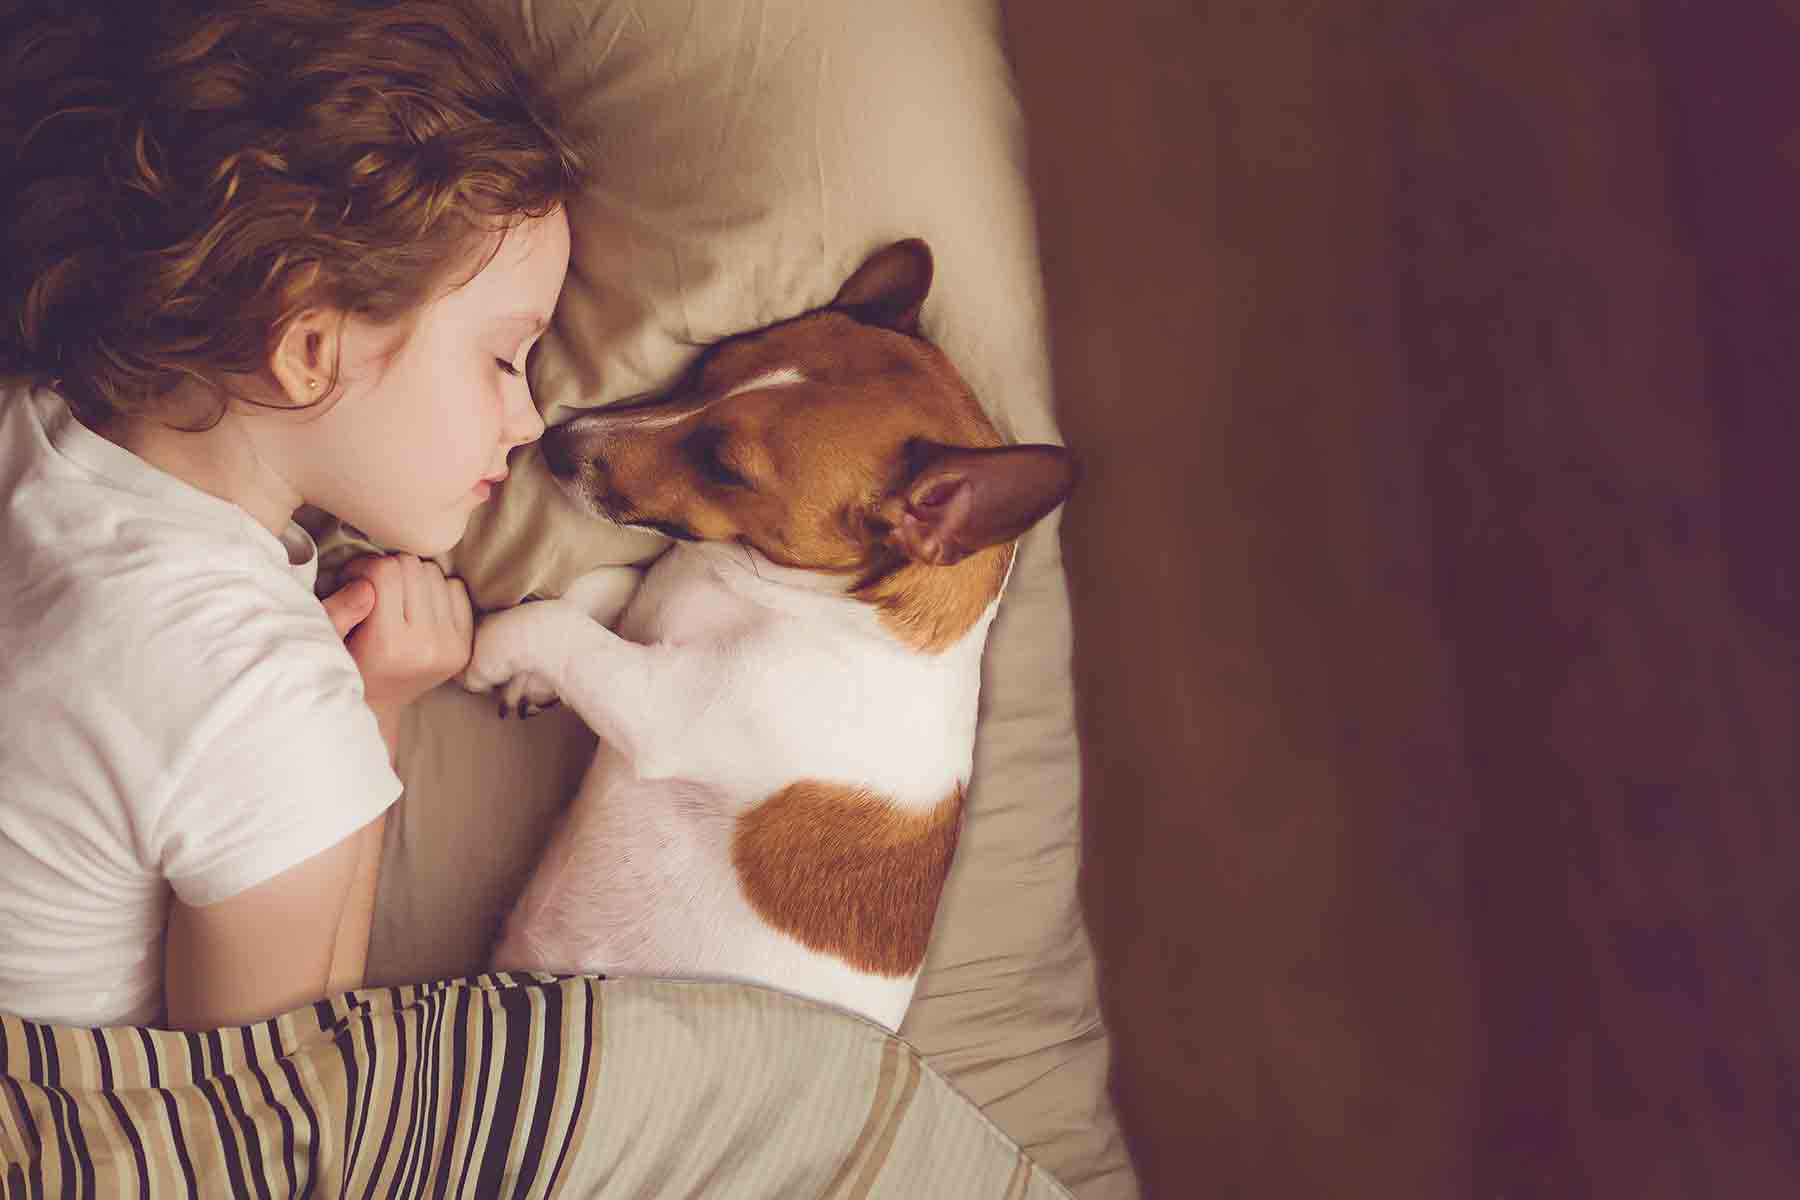 Little girl sleeping with puppy in bed